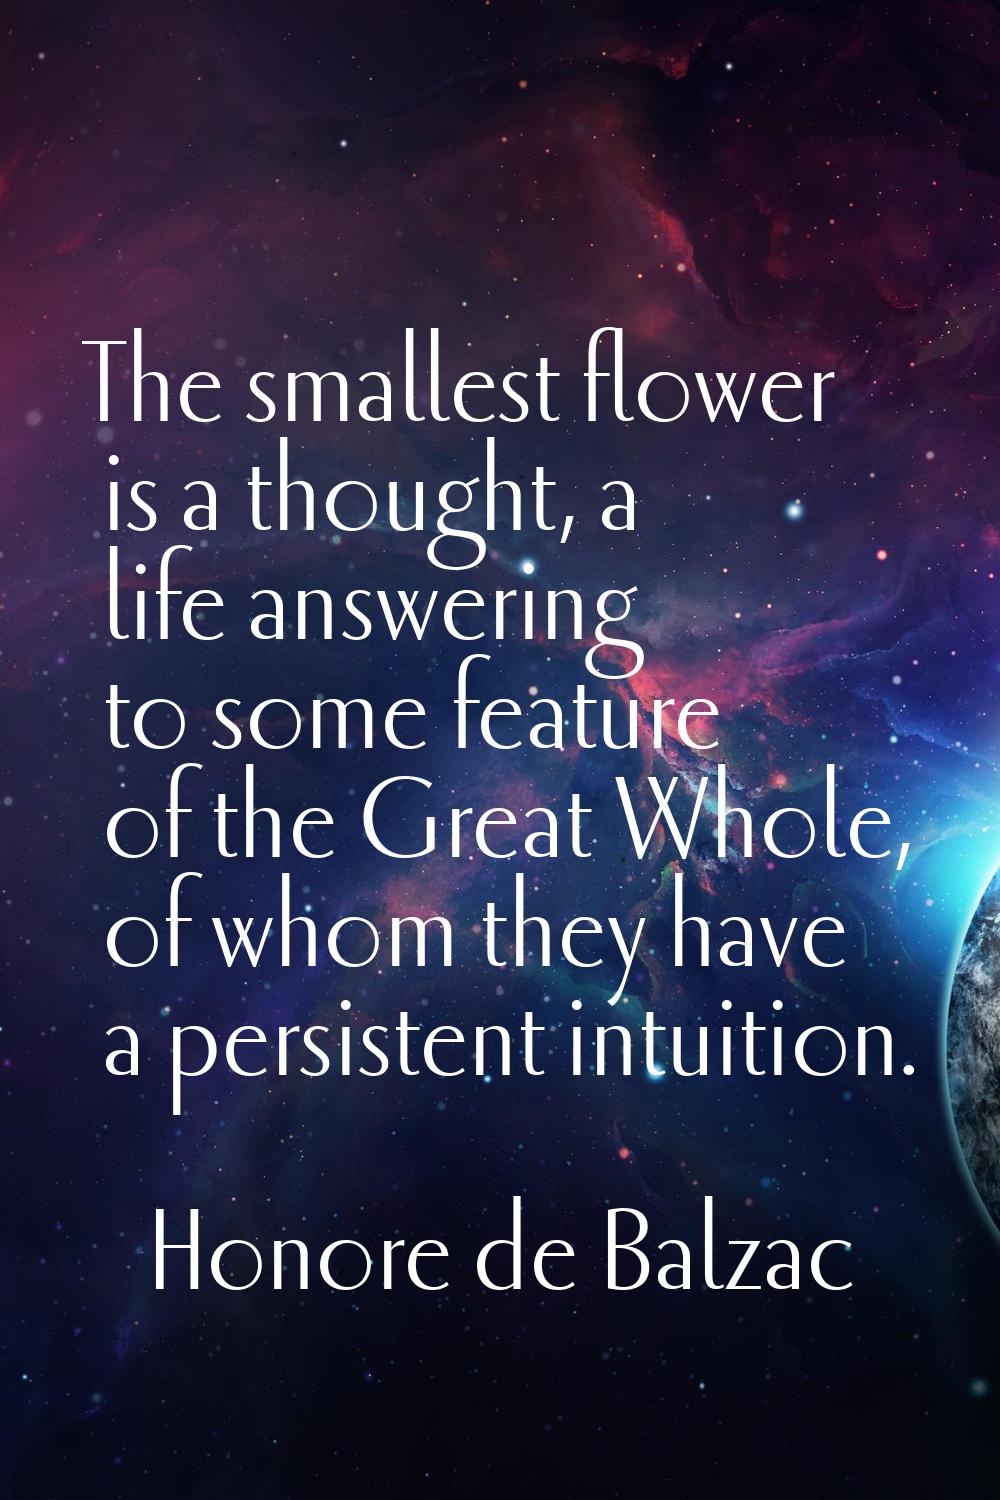 The smallest flower is a thought, a life answering to some feature of the Great Whole, of whom they